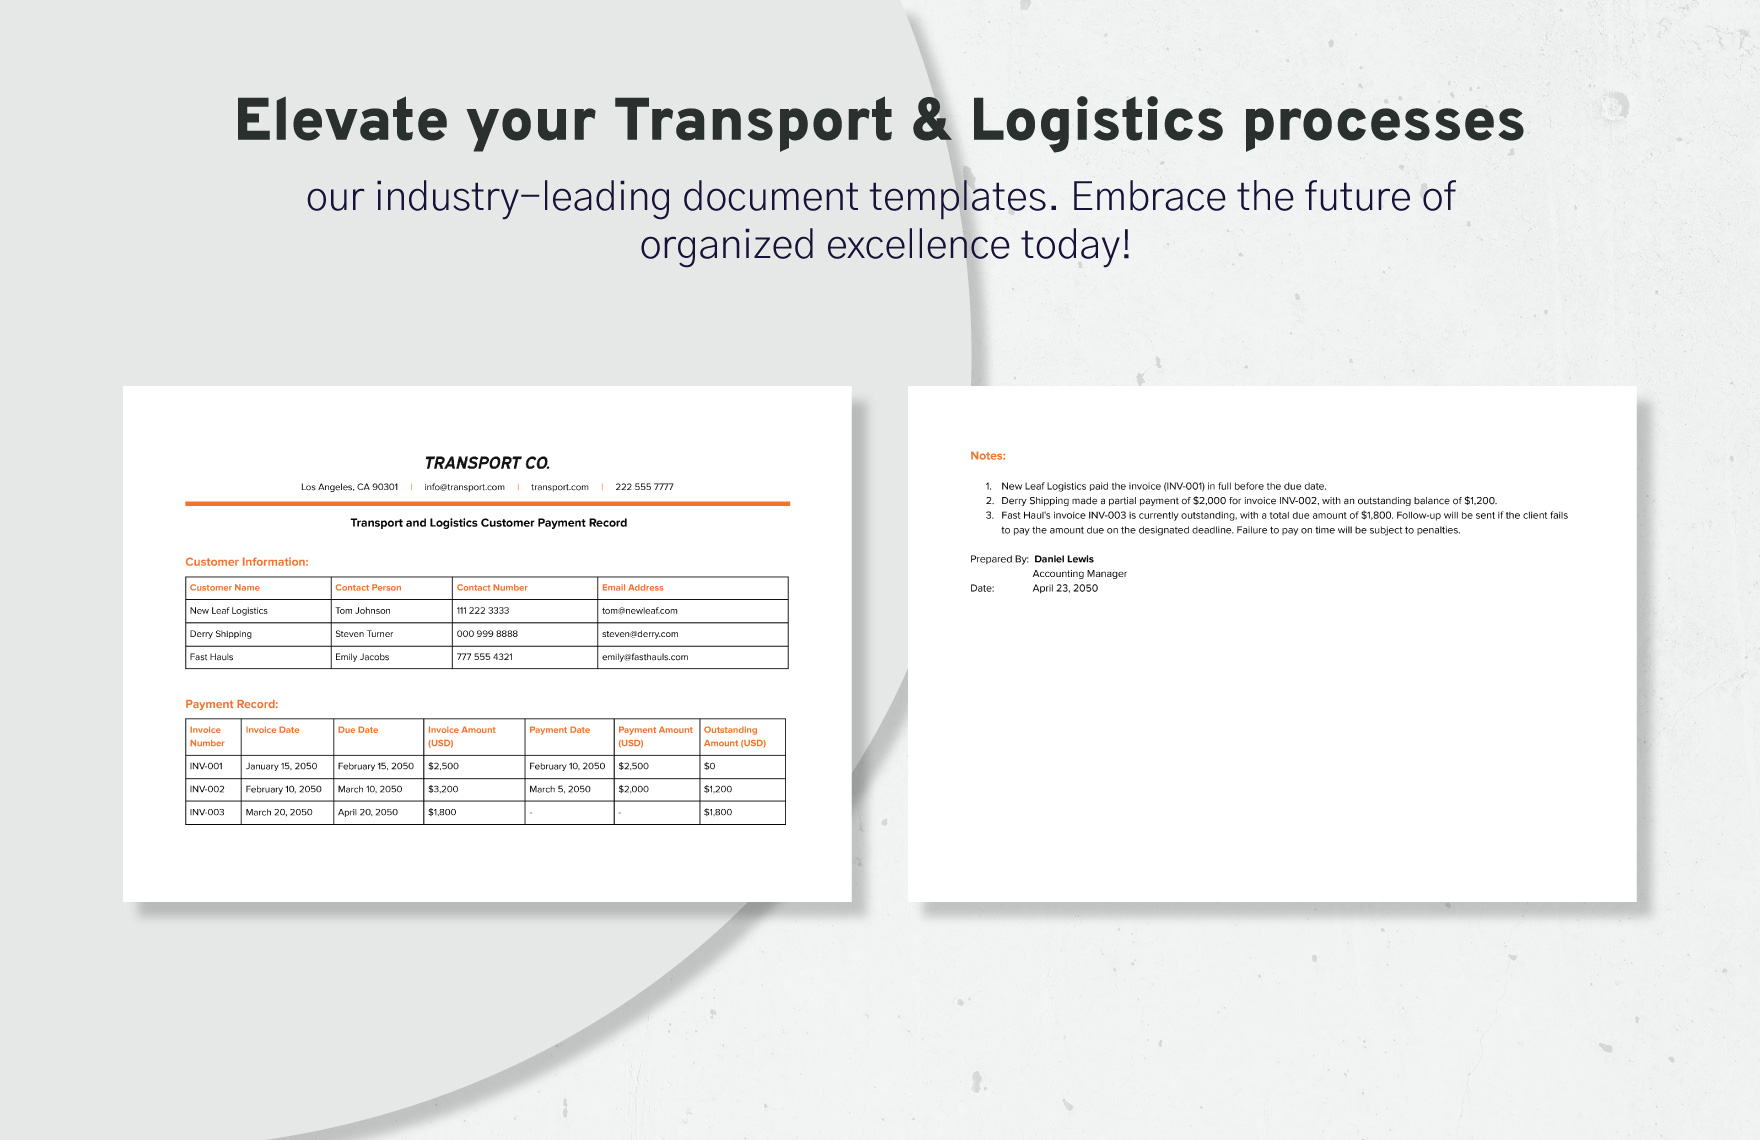 Transport and Logistics Customer Payment Record Template